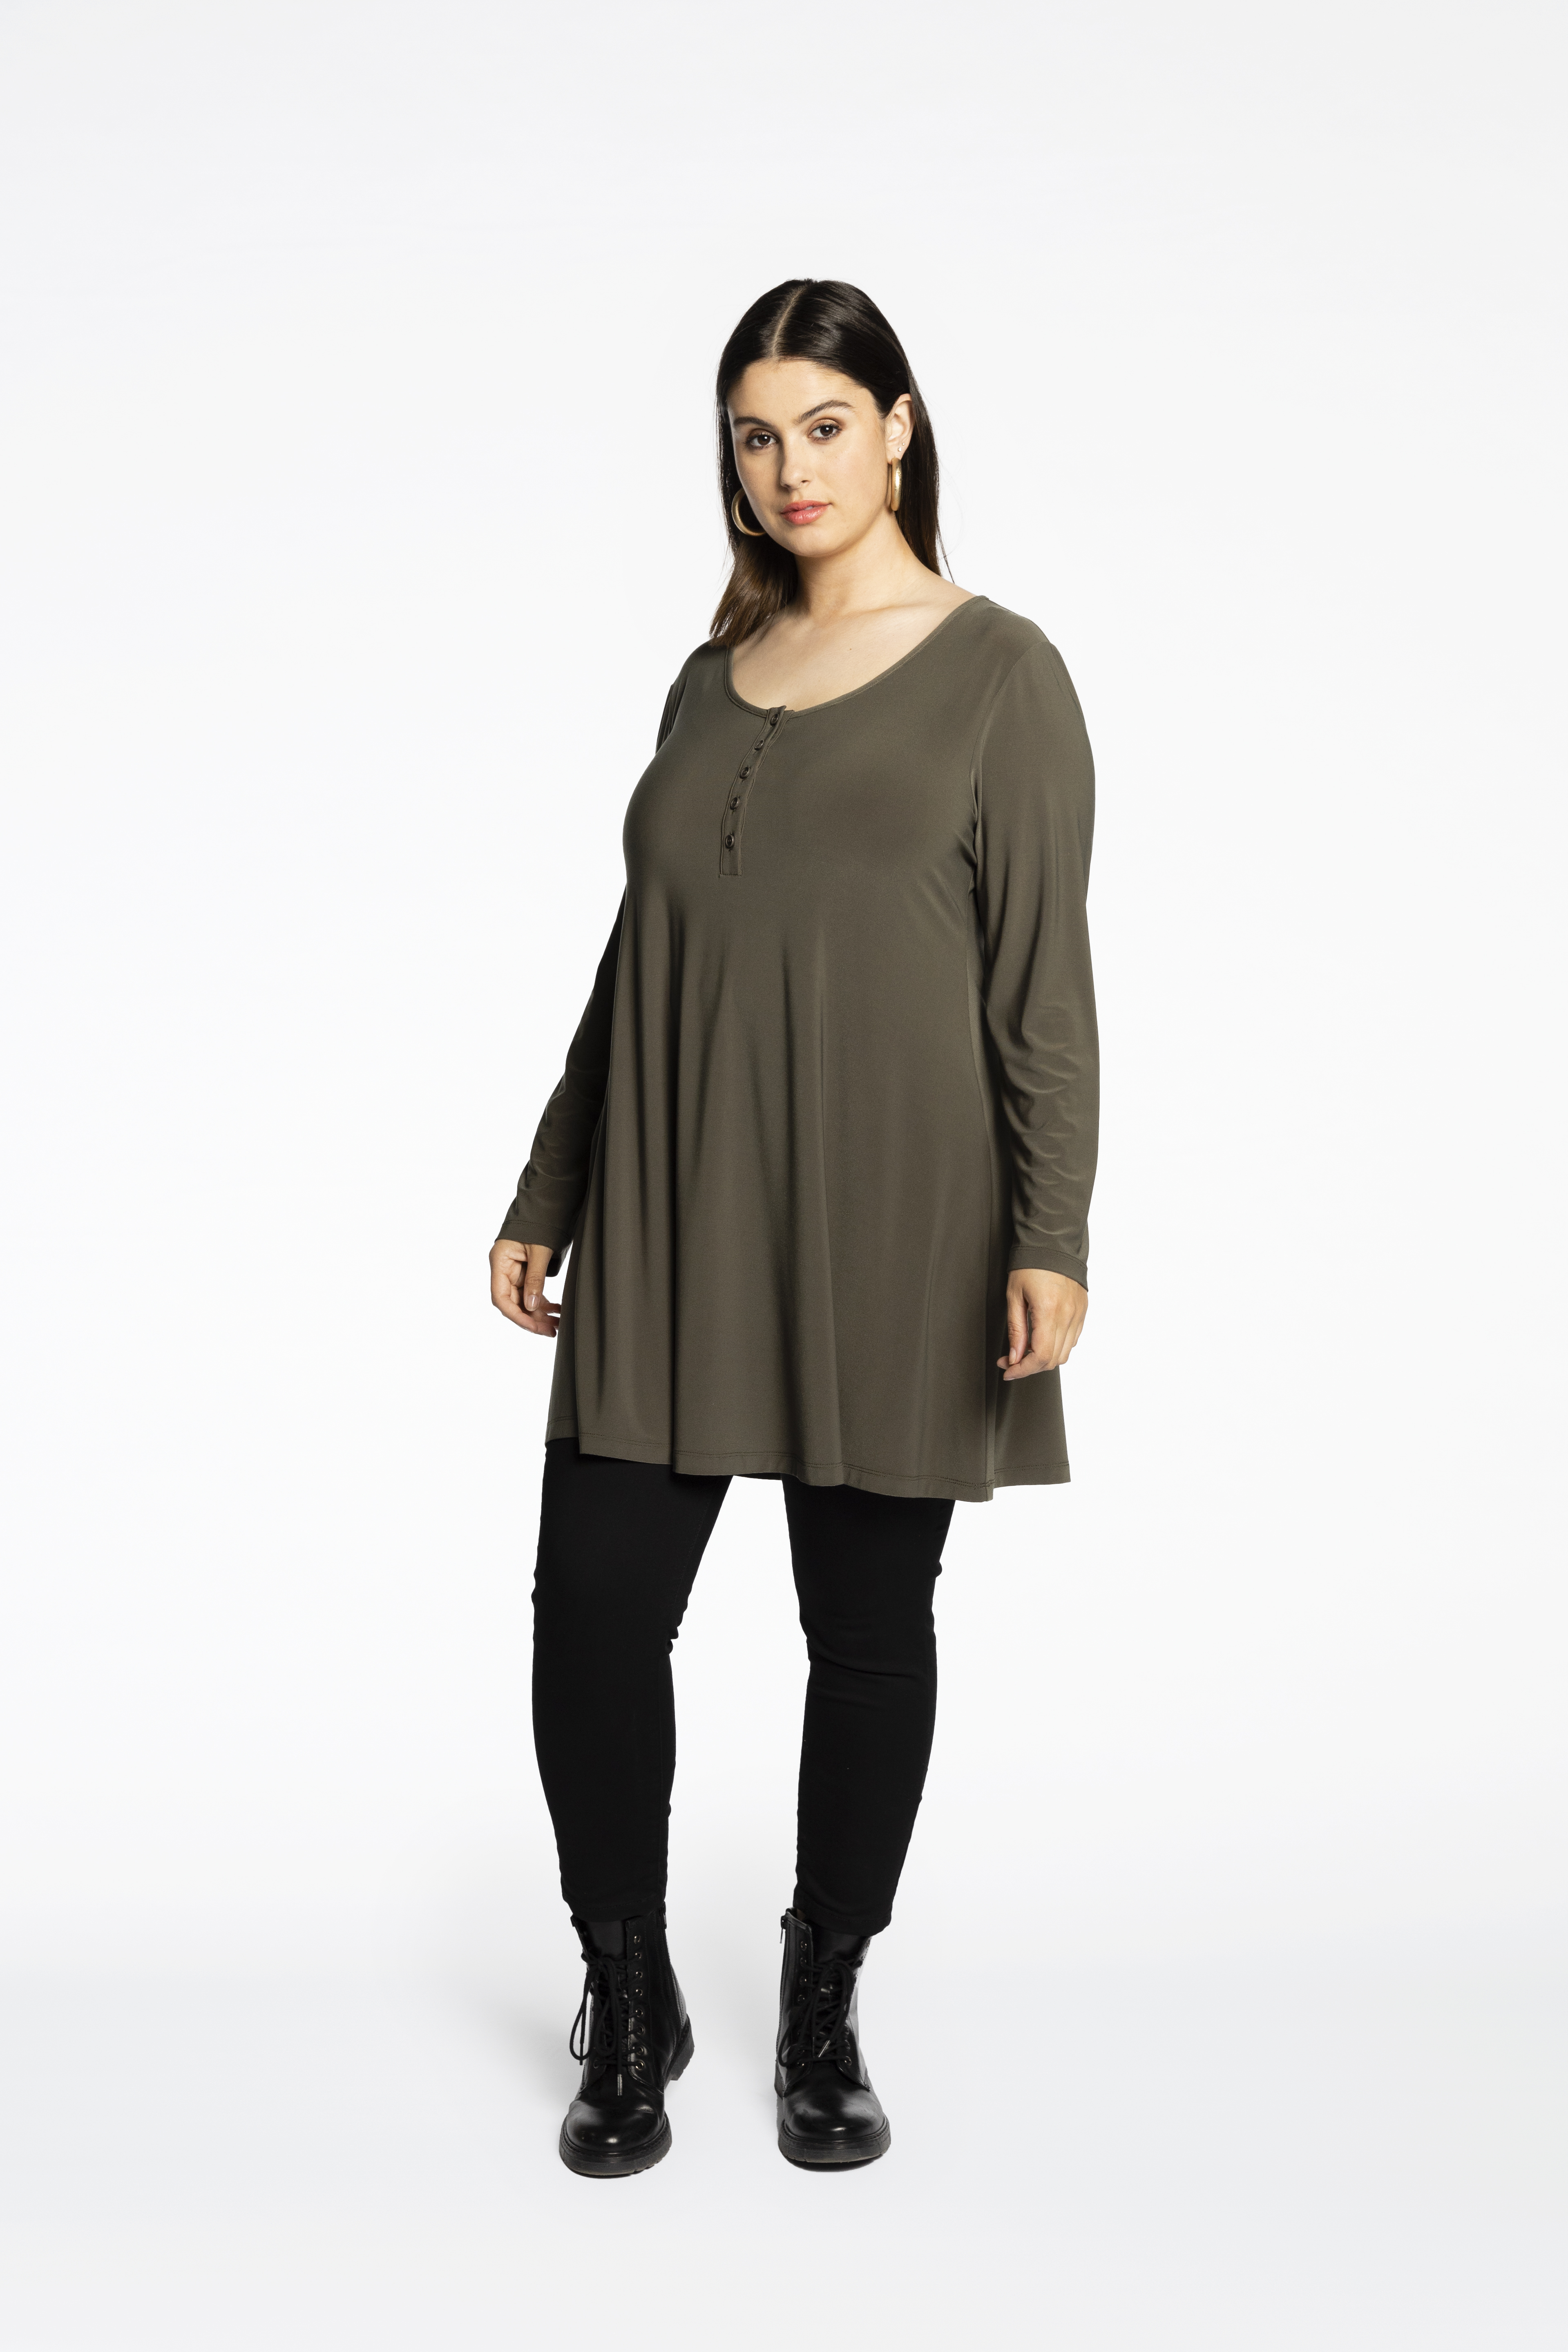 Tunic wide bottom buttoned DOLCE - black green 